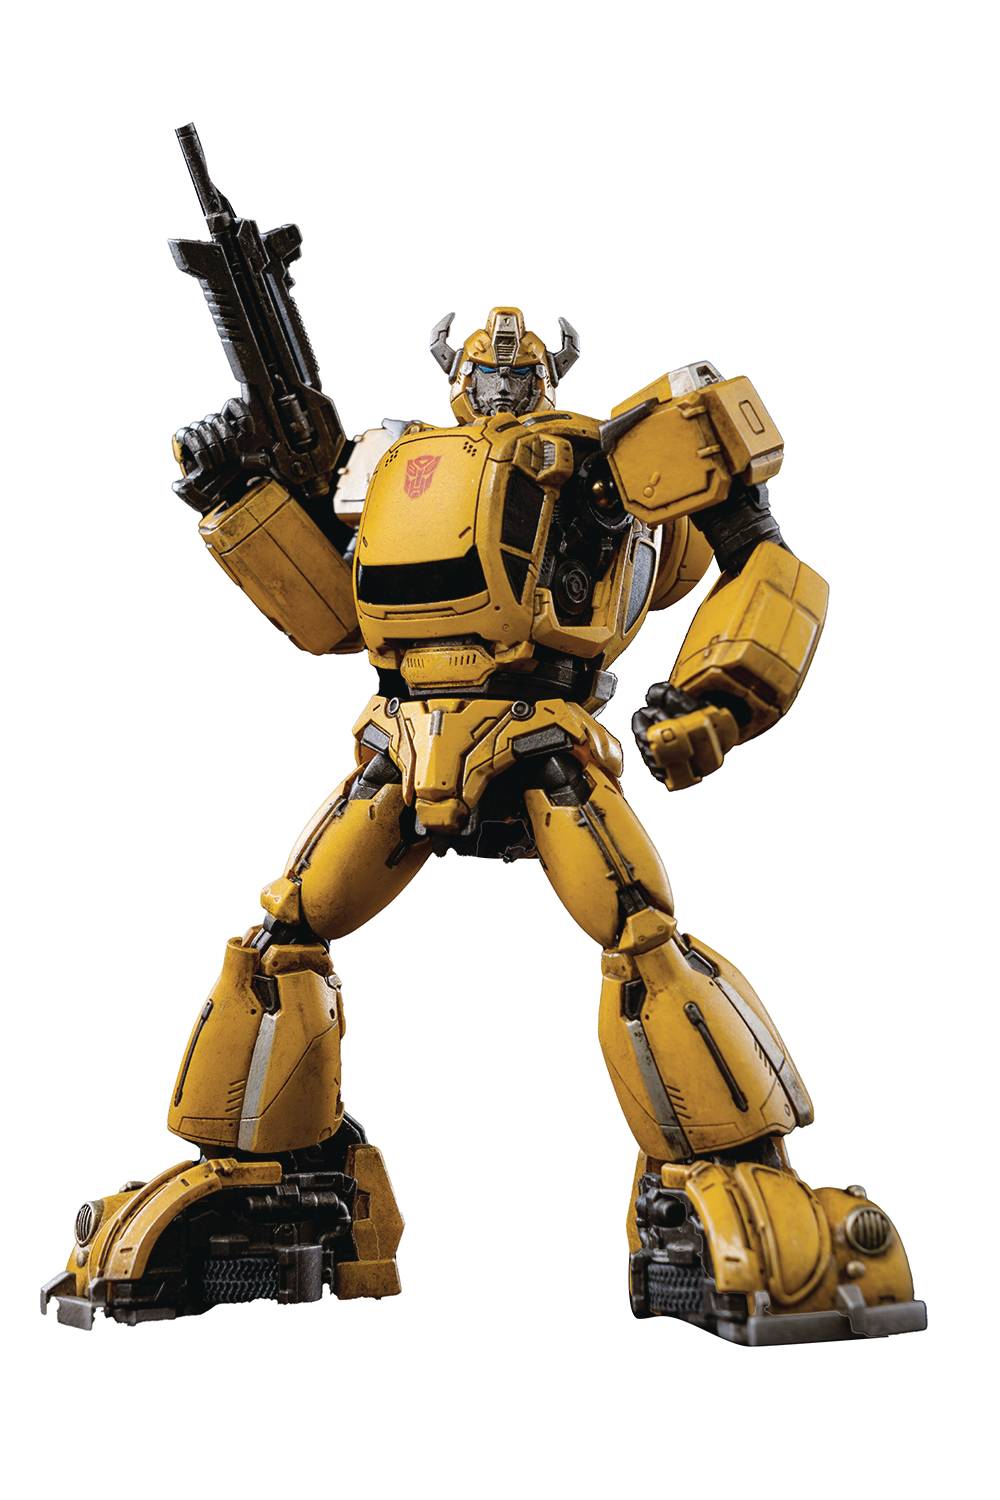 TRANSFORMERS MDLX BUMBLEBEE SMALL SCALE ARTICULATED FIG (NET